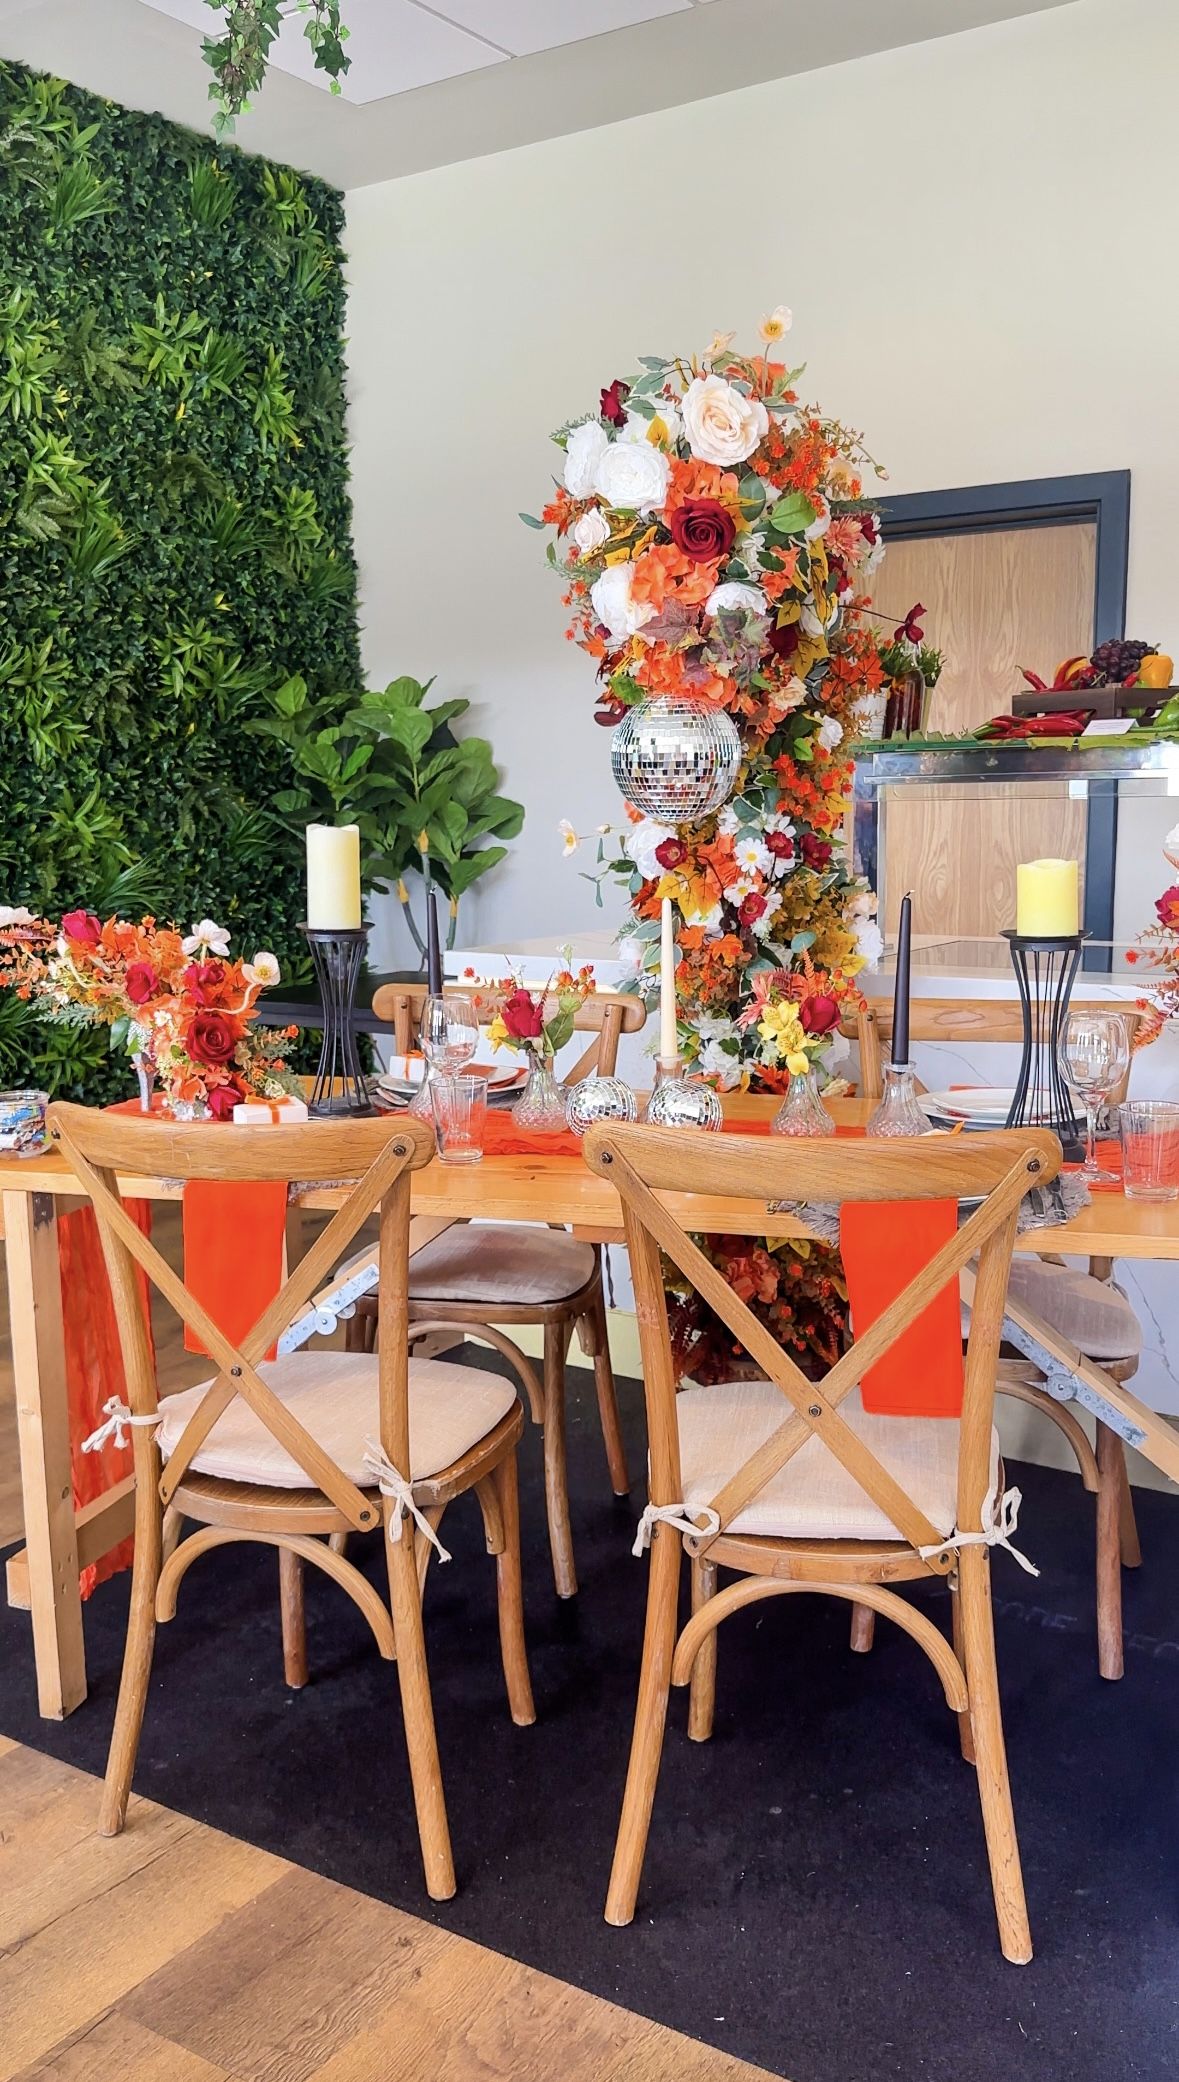 Autumnal Floral Table Display